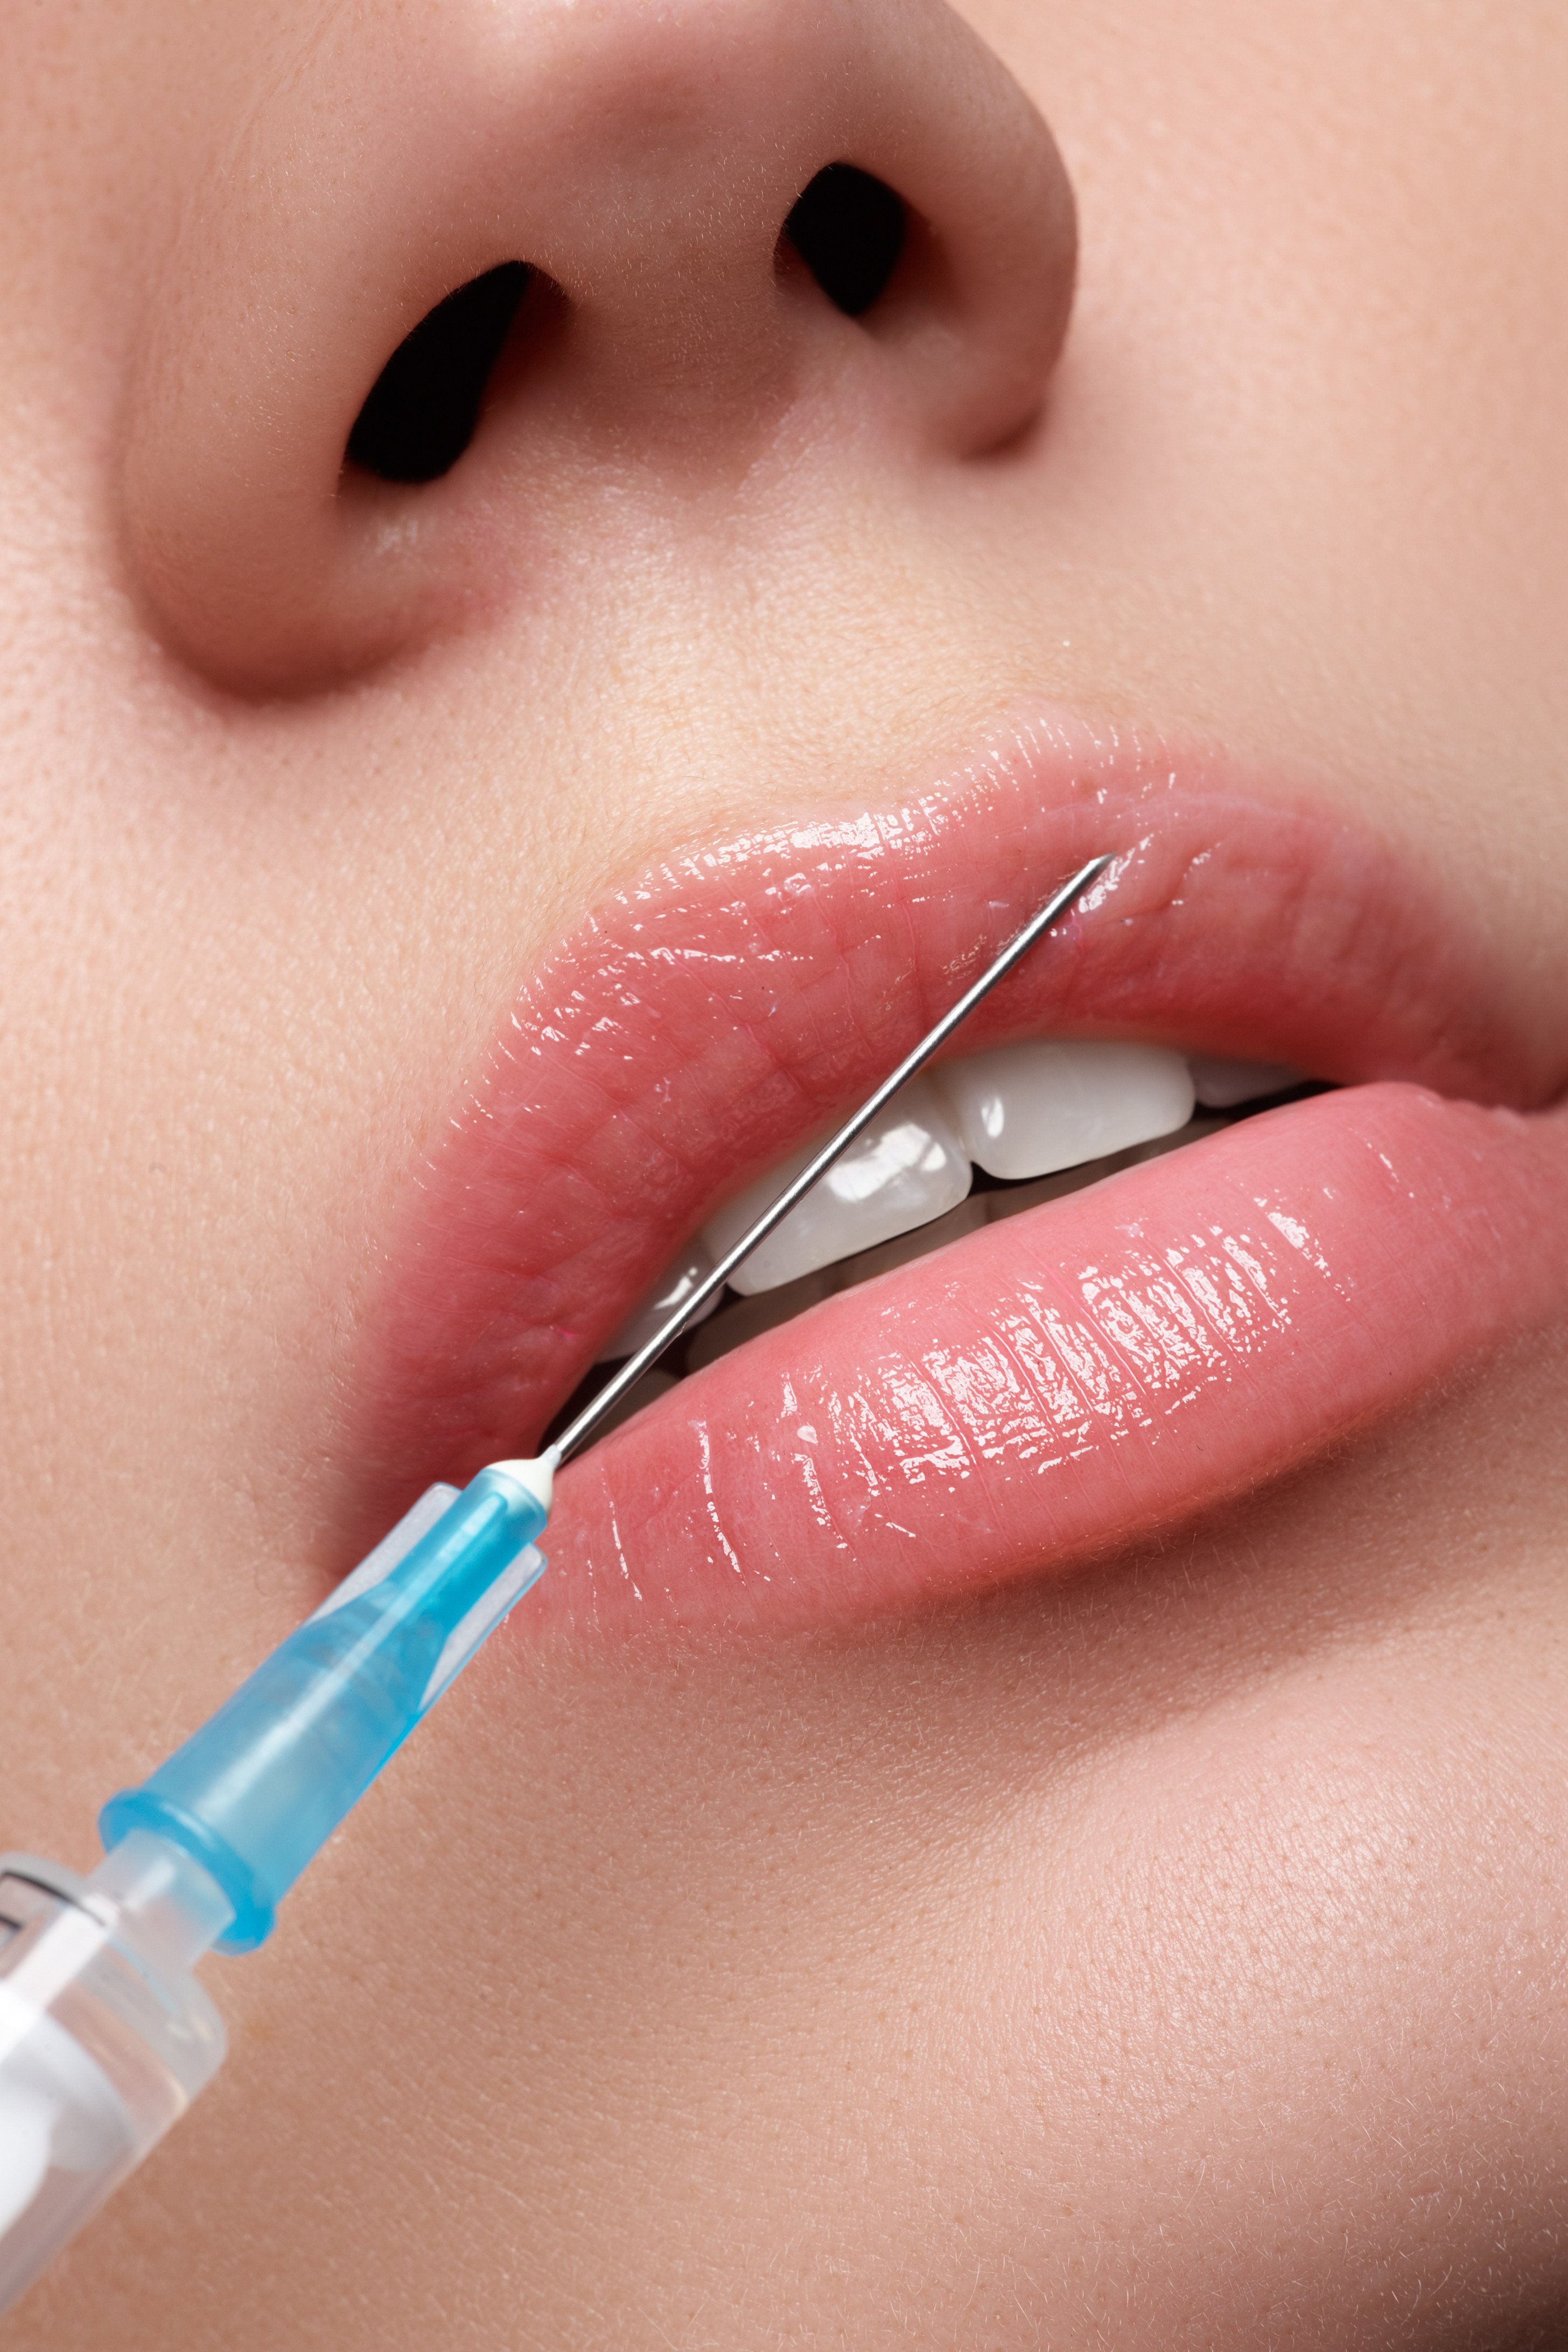 An unlicensed medical practitioner has been arrested in Hainan after a woman died during a cosmetic procedure. Photo: Shutterstock